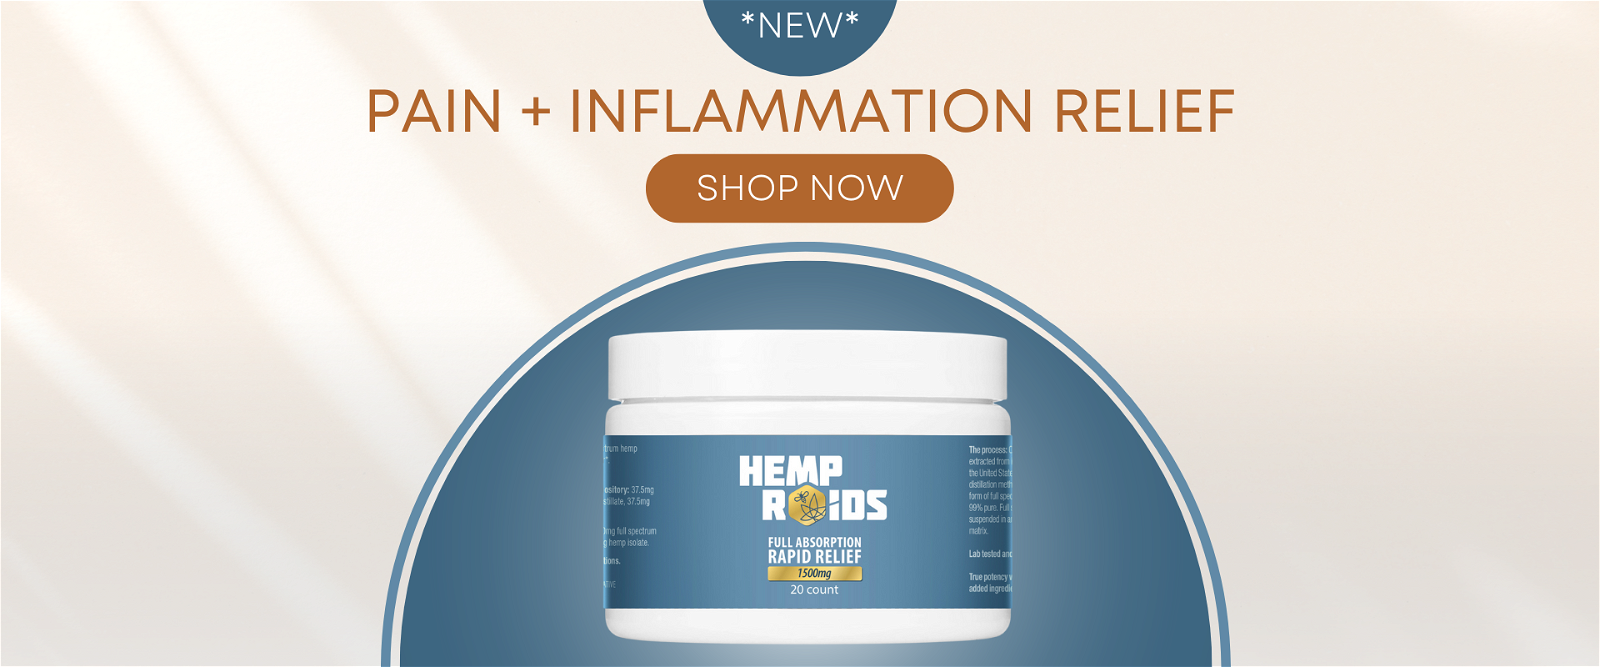 Pain + Inflammation Relief, Shop Now!